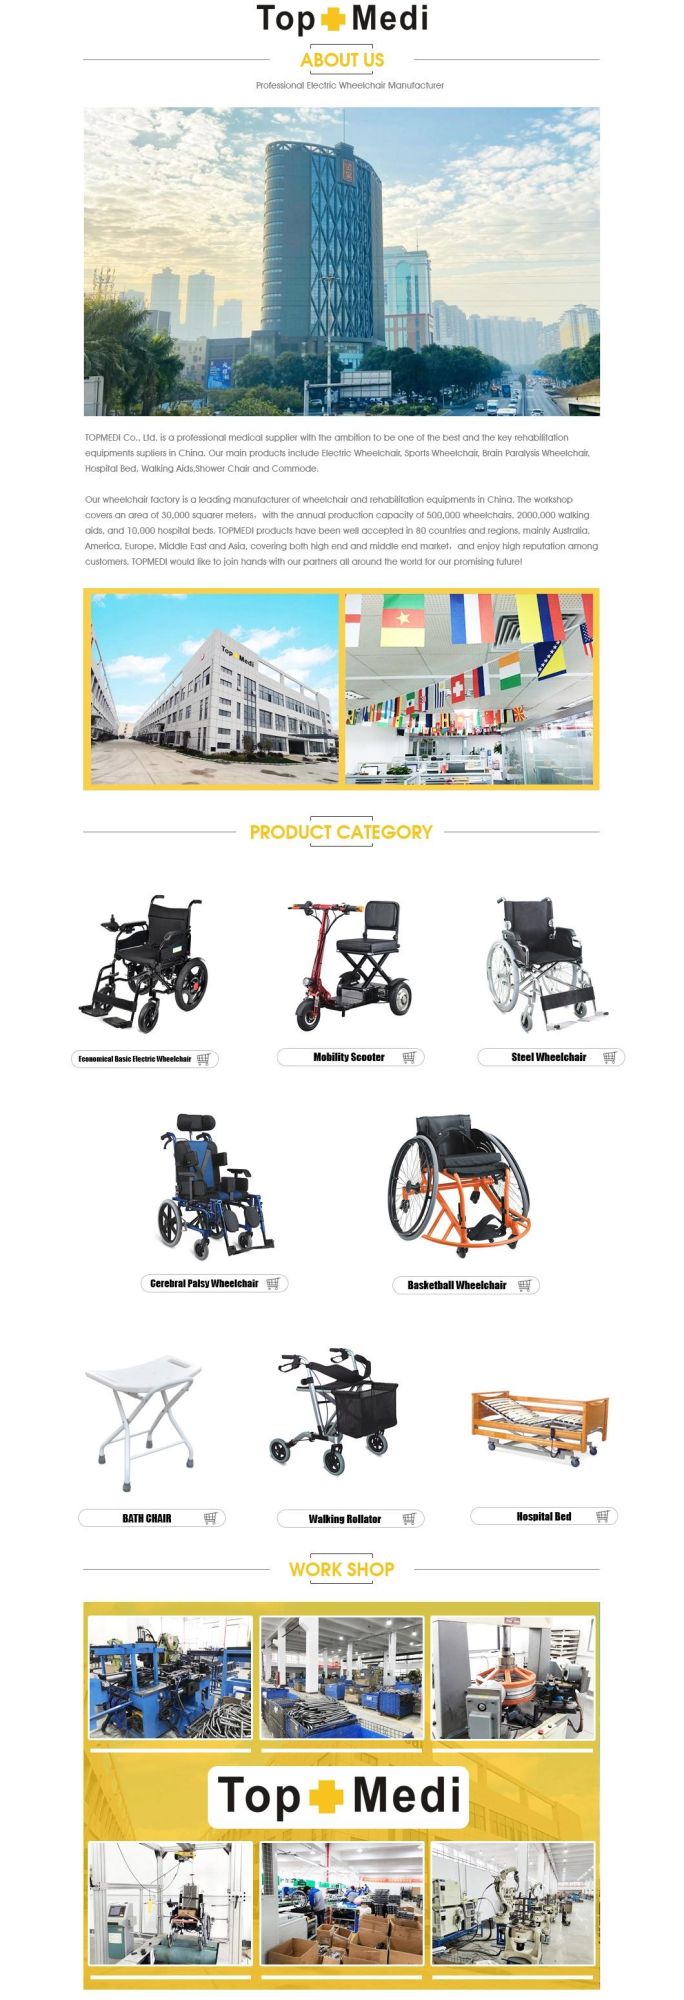 China New Manual Foldable Electric for Adults Price Outdoor Folding Wheelchair in